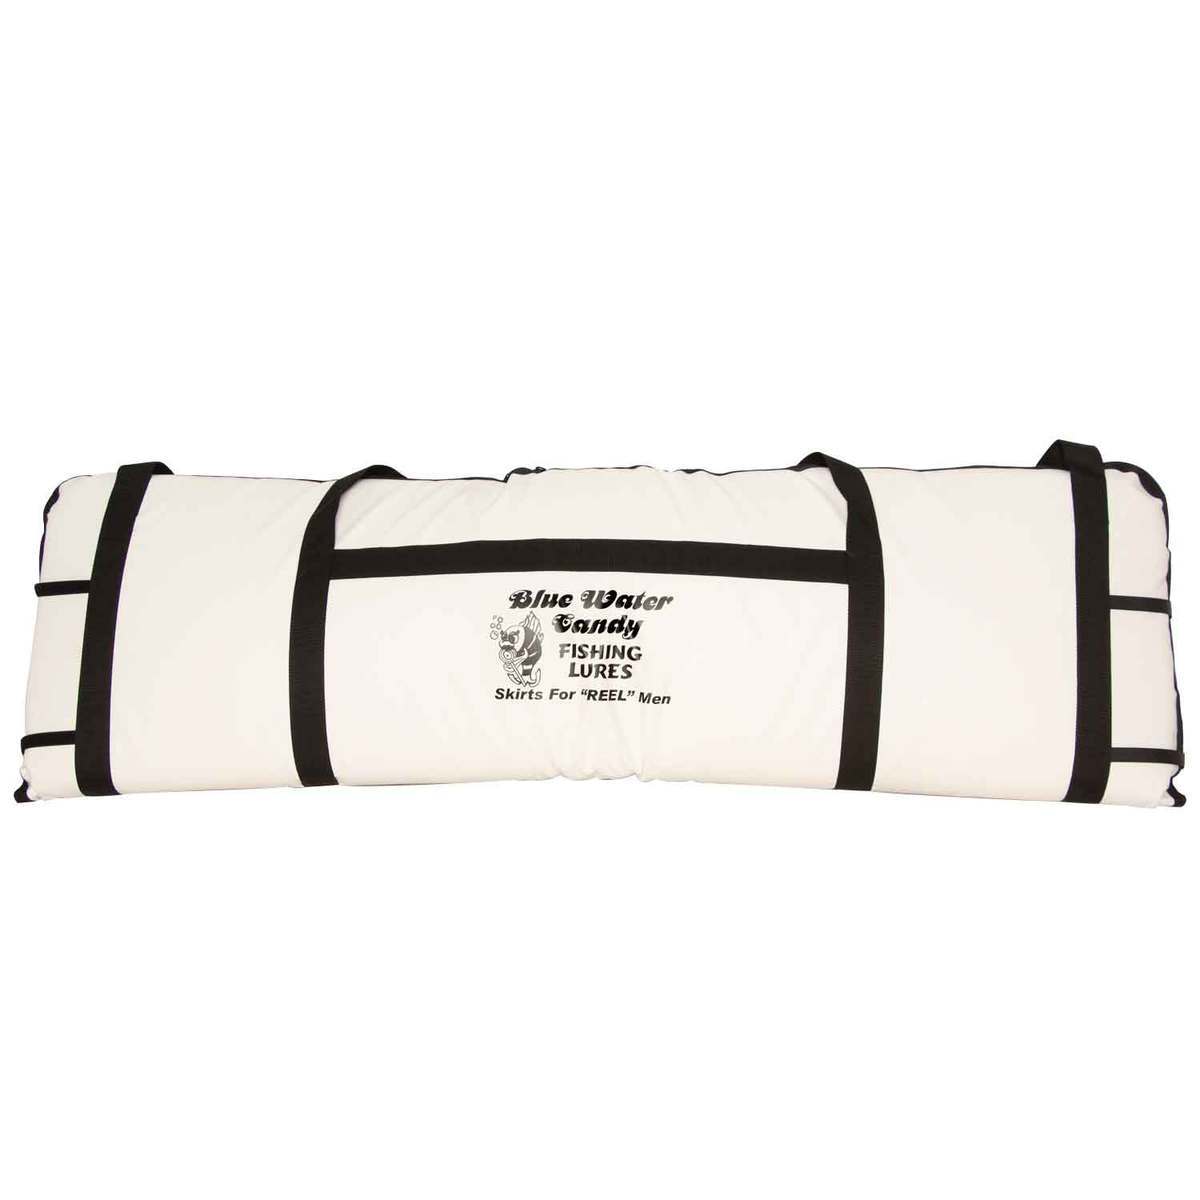 Blue Water Candy Fish Cooler Bag Fish Keeper - White - White 65in